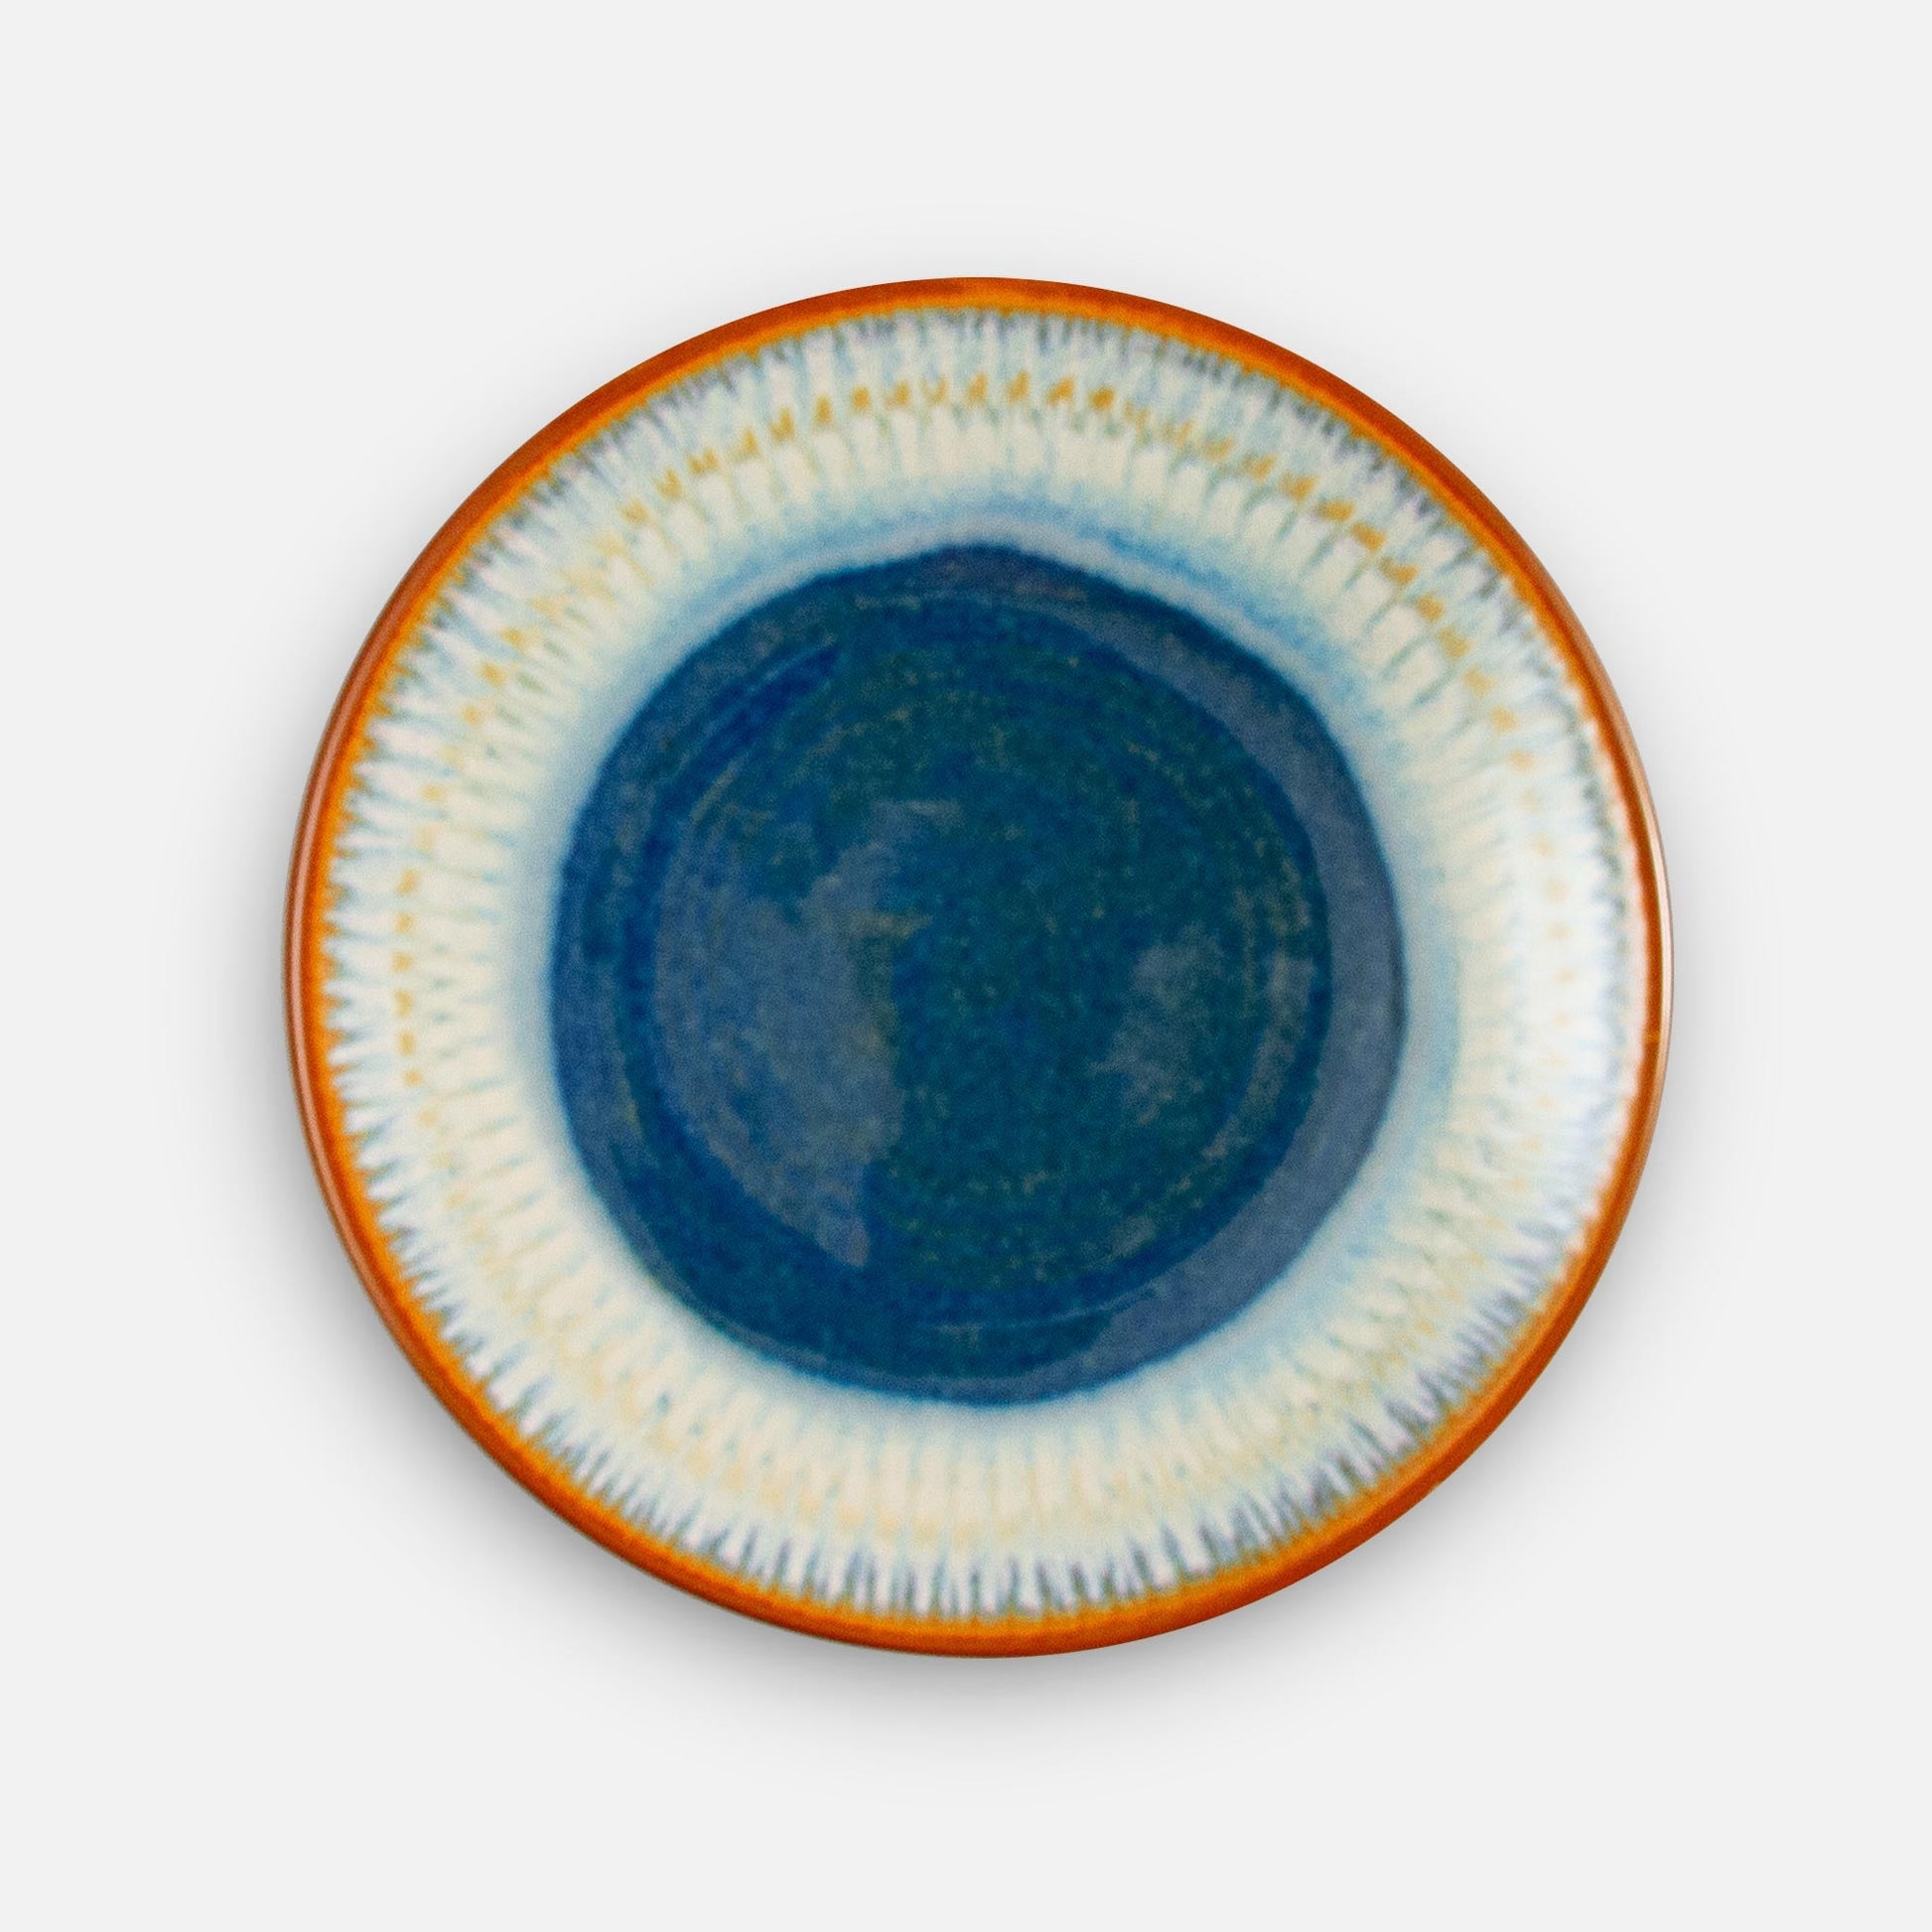 Handmade Pottery Rimless Dessert Plate made by Georgetown Pottery in Maine in Cobalt Pattern